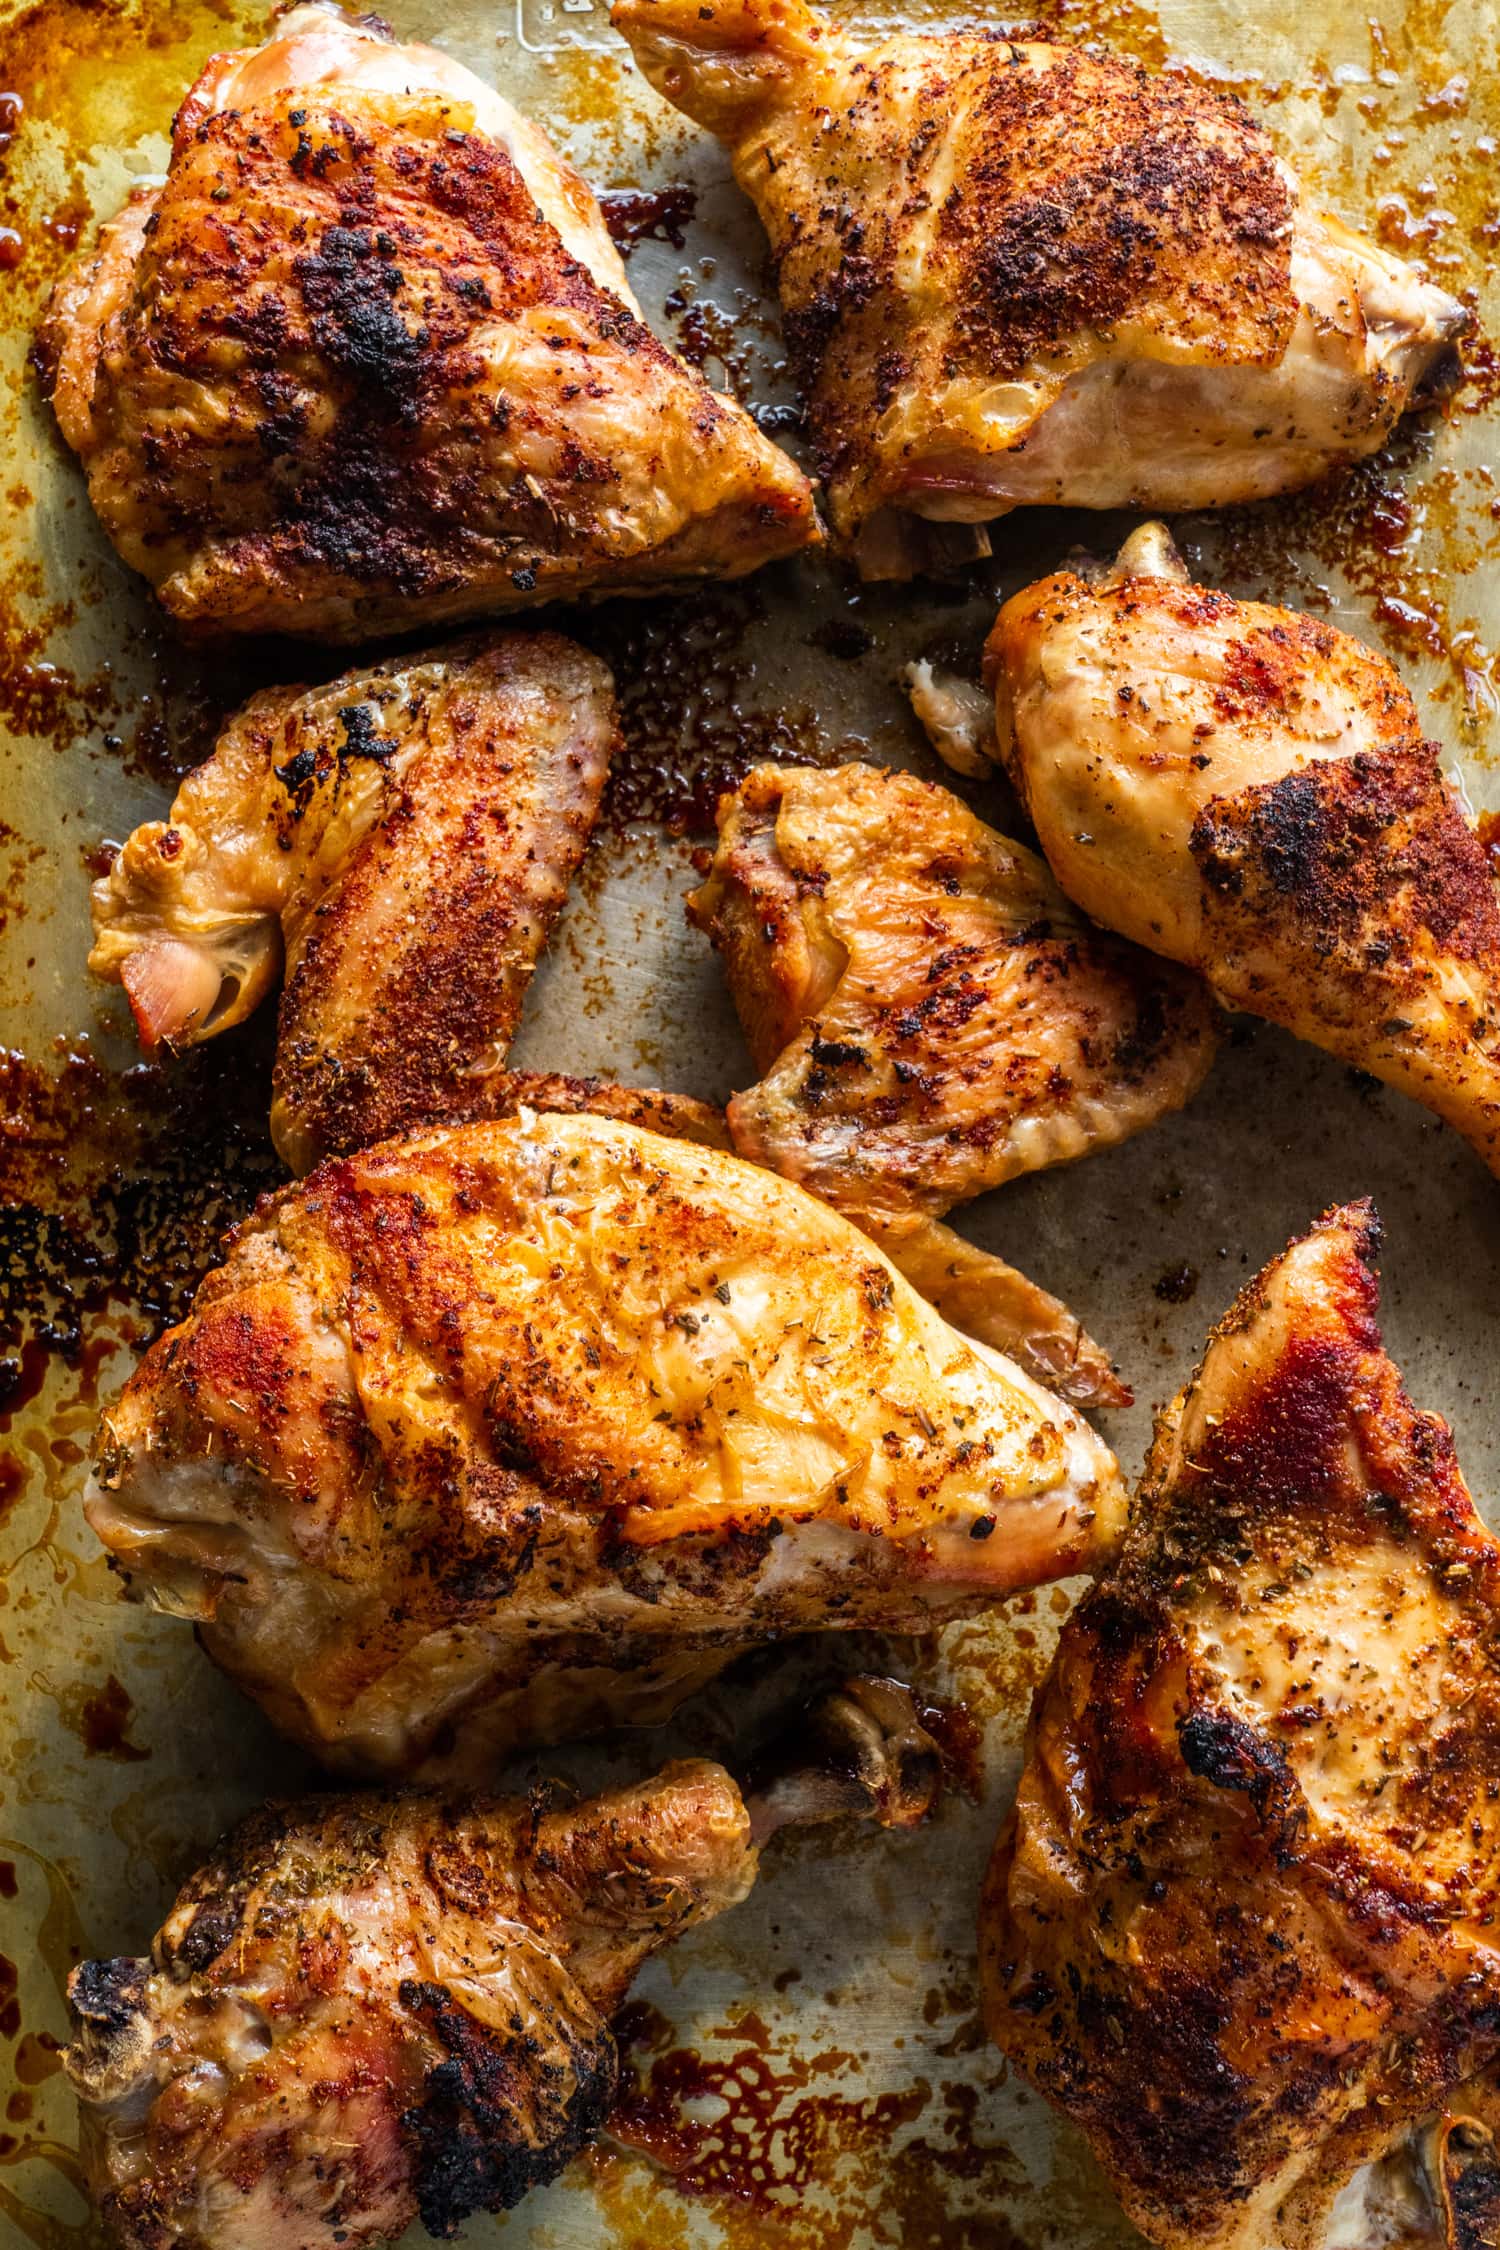 https://brooklynfarmgirl.com/wp-content/uploads/2021/07/How-to-Make-Rotisserie-Chicken-in-the-Oven_6.jpg